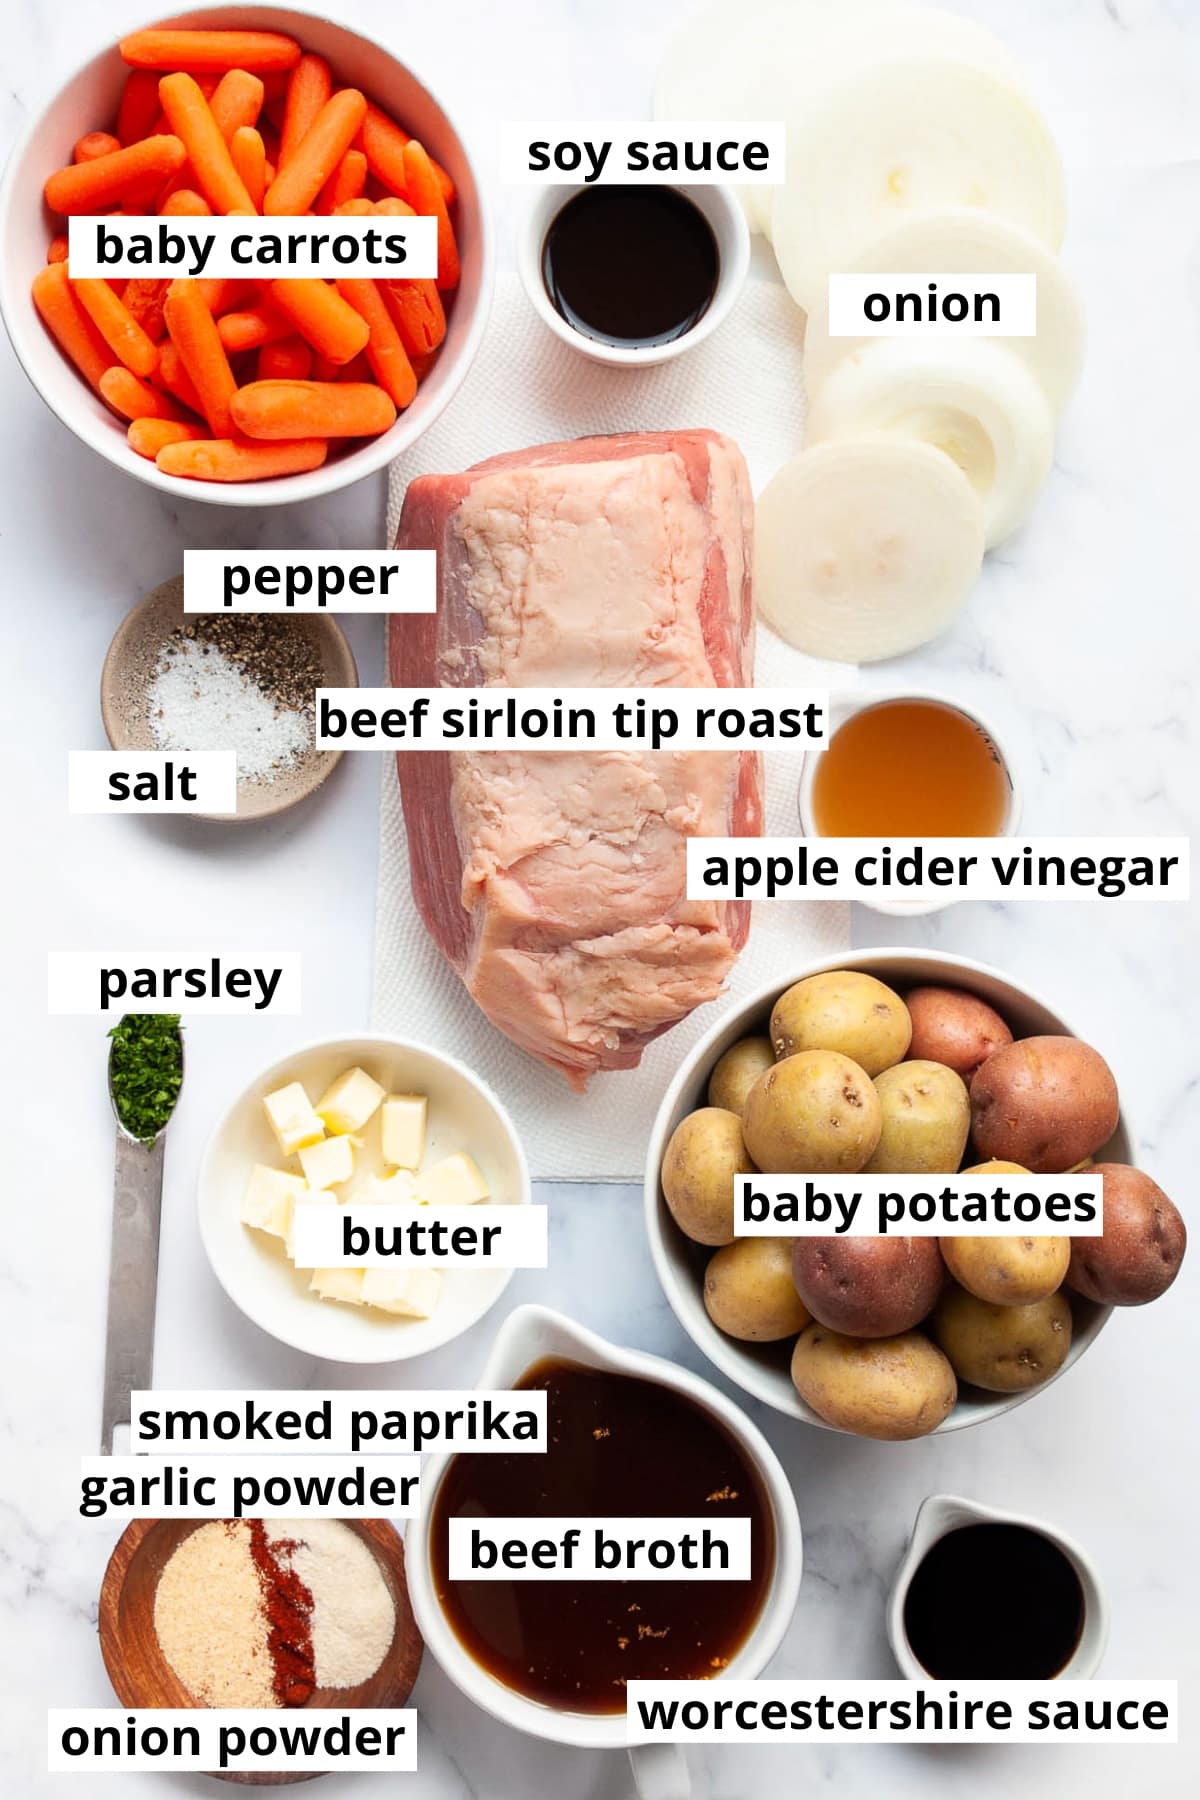 Beef sirloin tip roast, baby potatoes, baby carrots, onion, soy sauce, apple cider vinegar, butter, beef broth, worcestershire, onion powder, garlic powder, smoked paprika, dried parsley, salt, pepper.